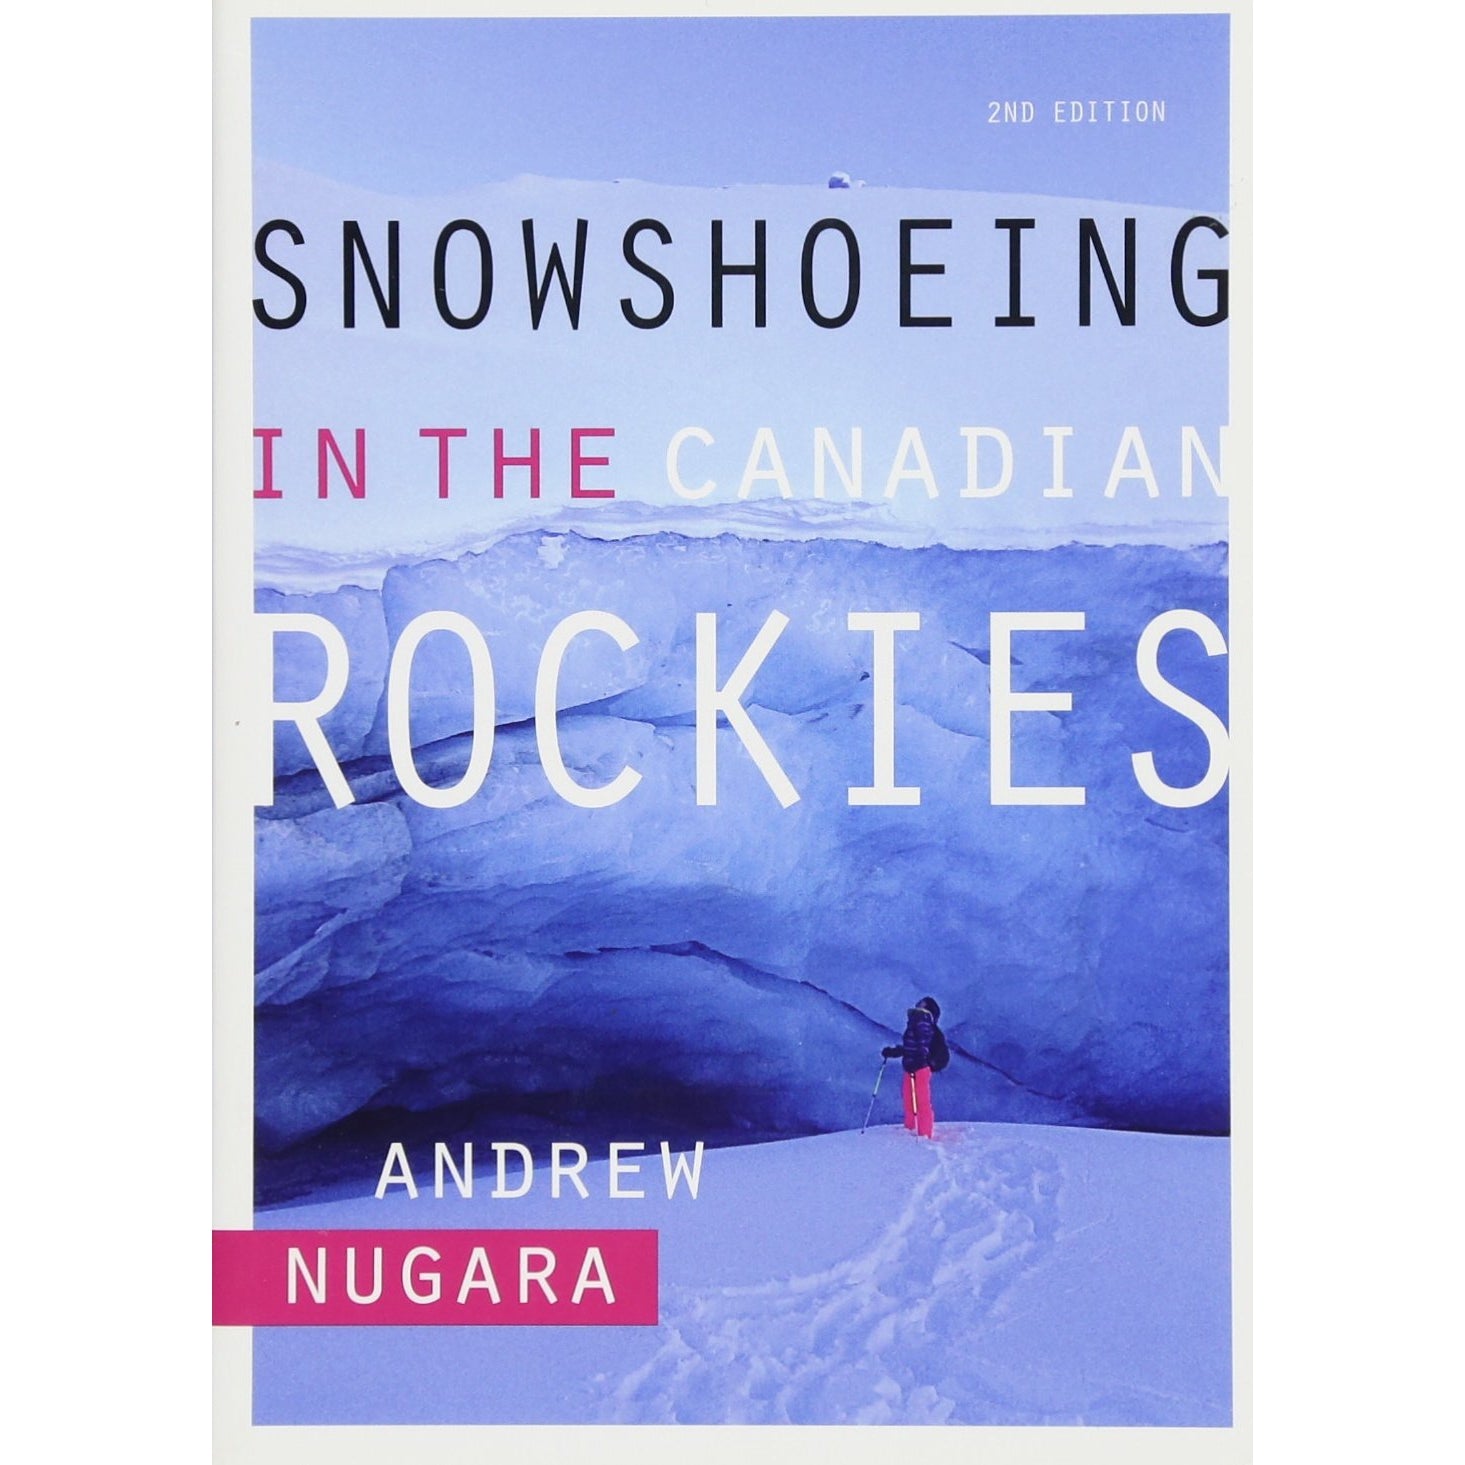 Snowshoeing in the Canadian Rockies – 2nd Edition by Andrew Nugara